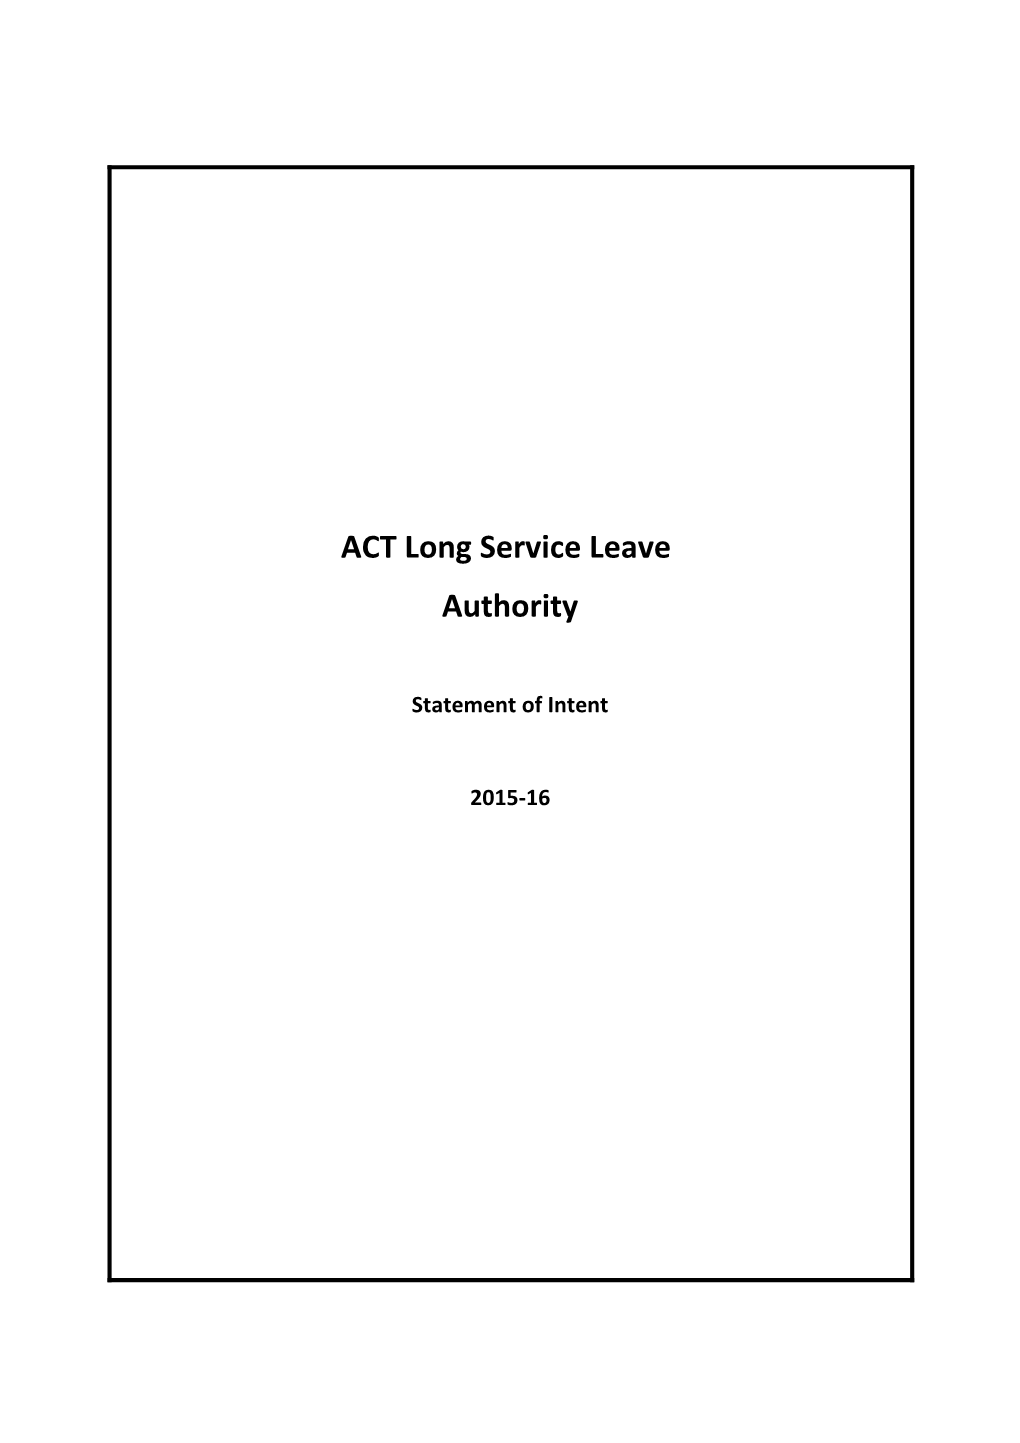 2015-16 Long Service Leave Authority Budget Statement